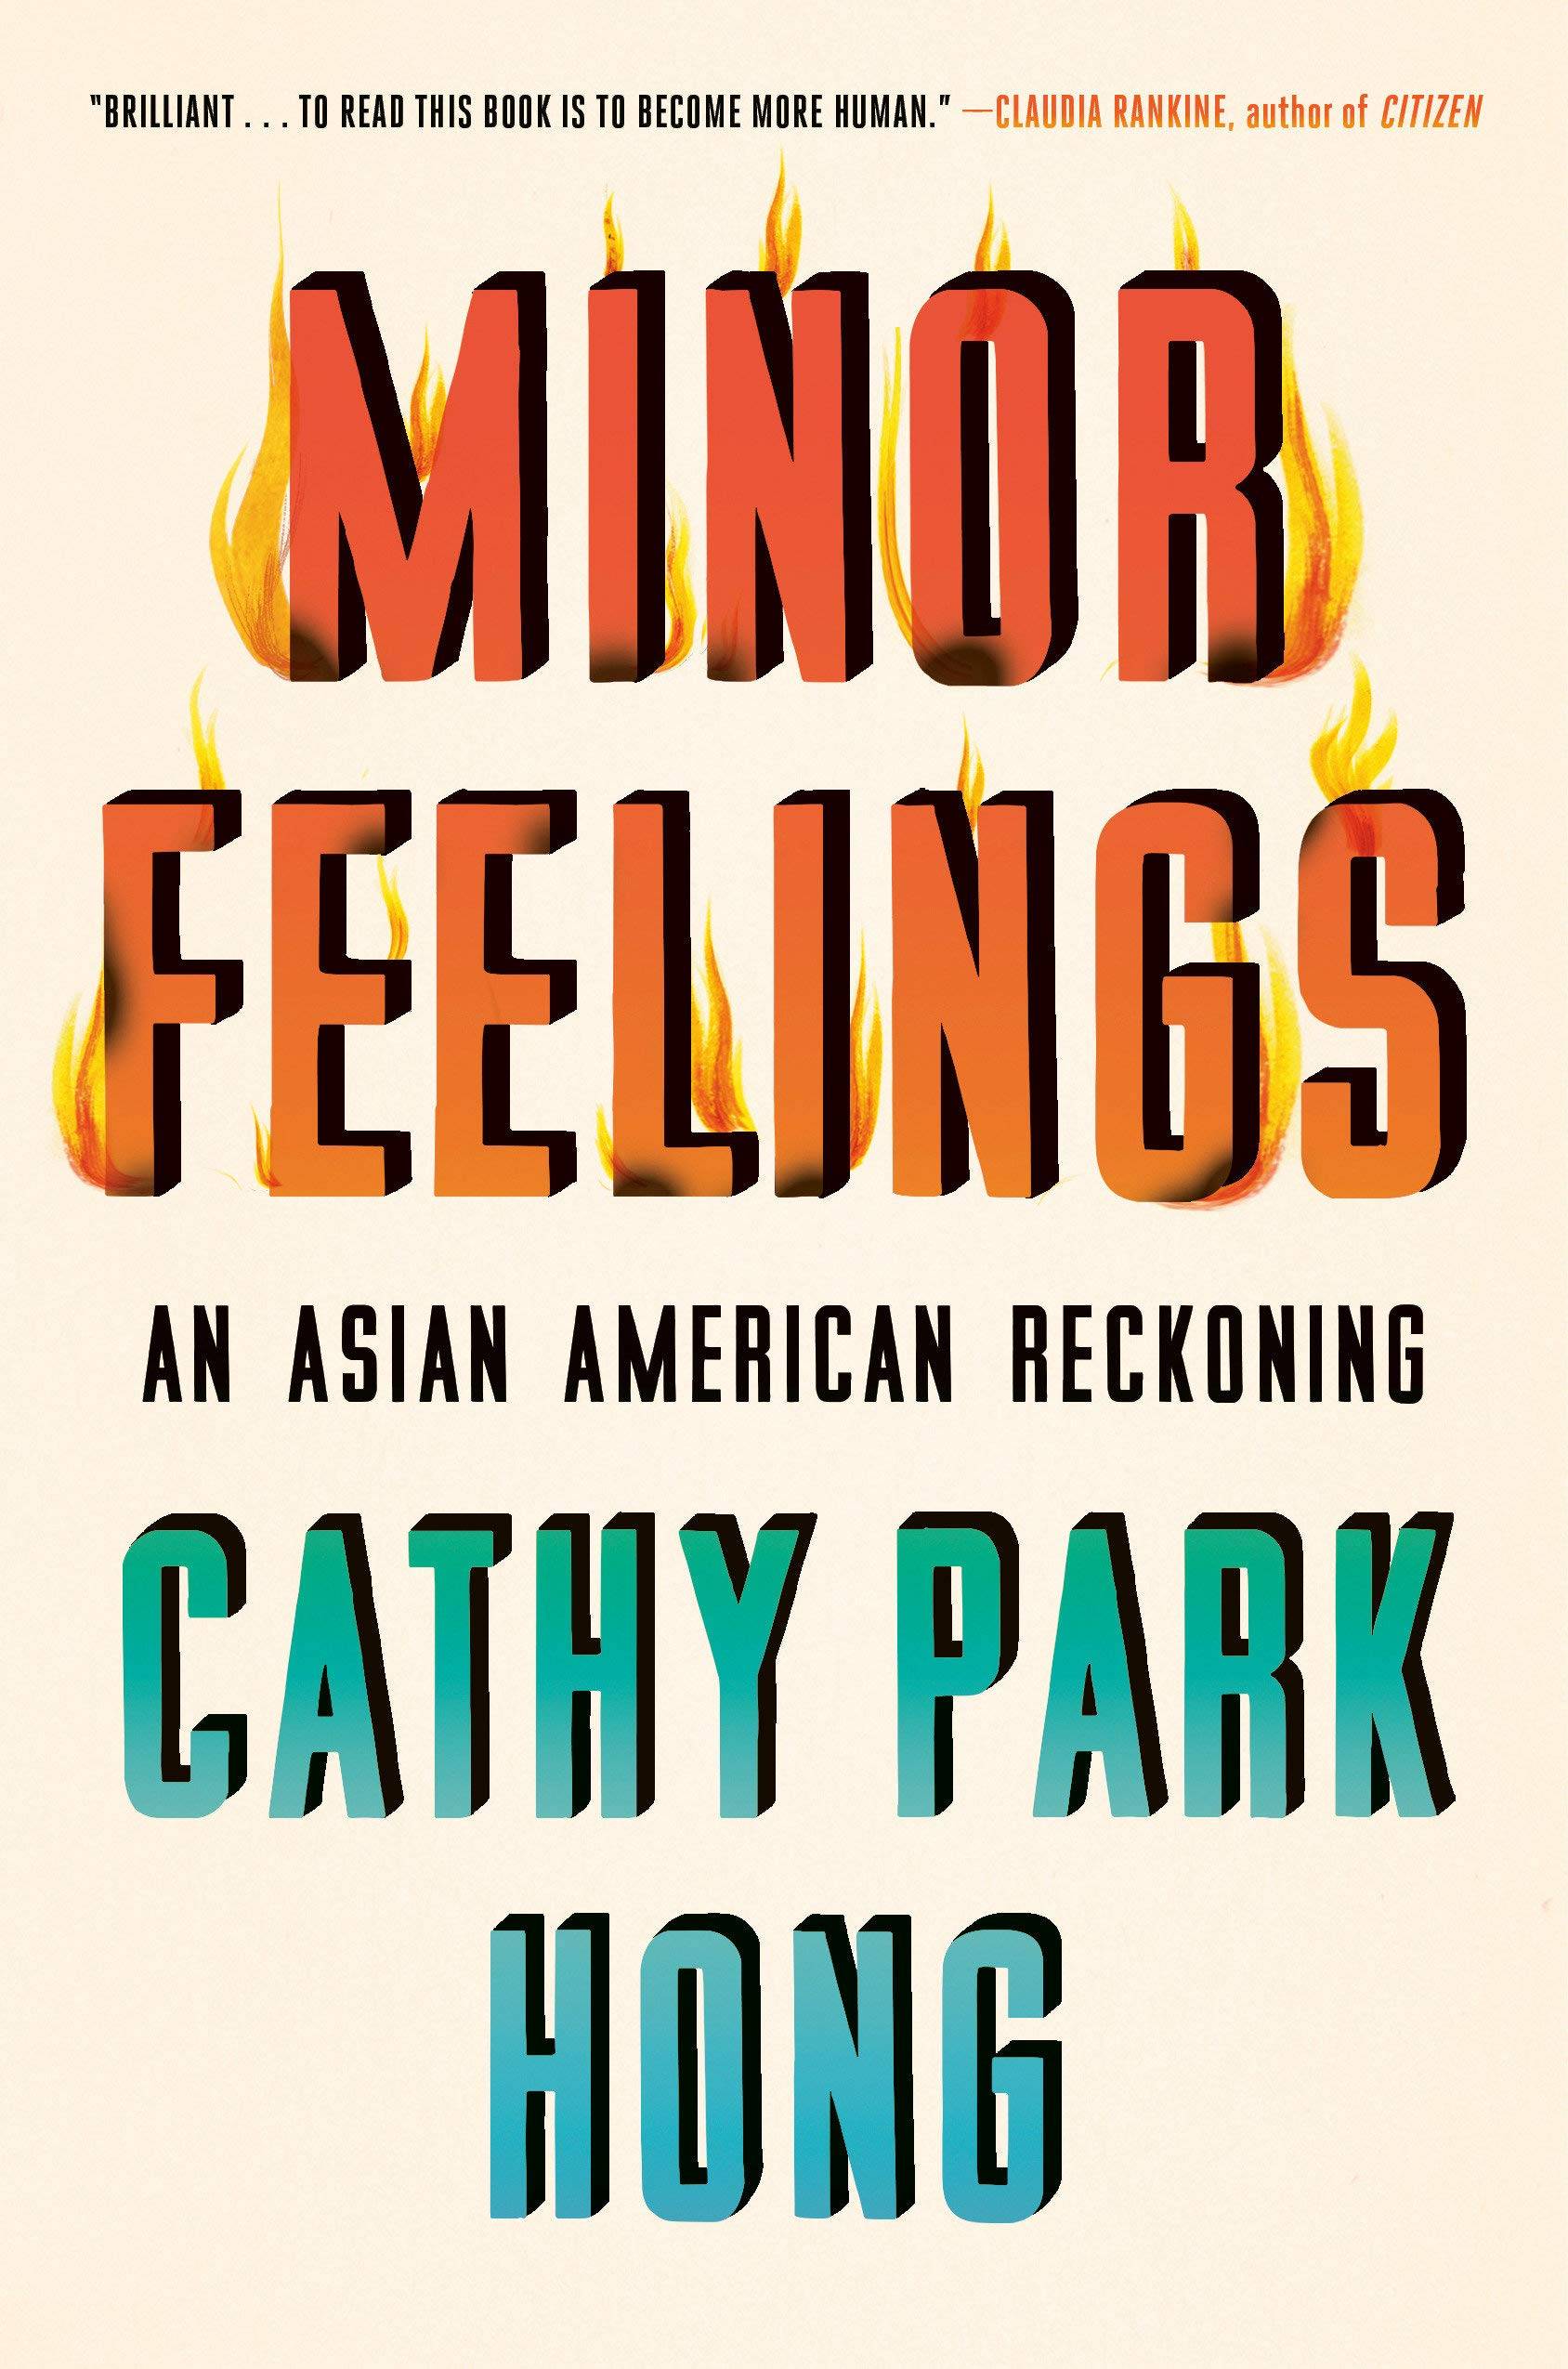 White "Minor Feelings" book cover with orange title text in flames.